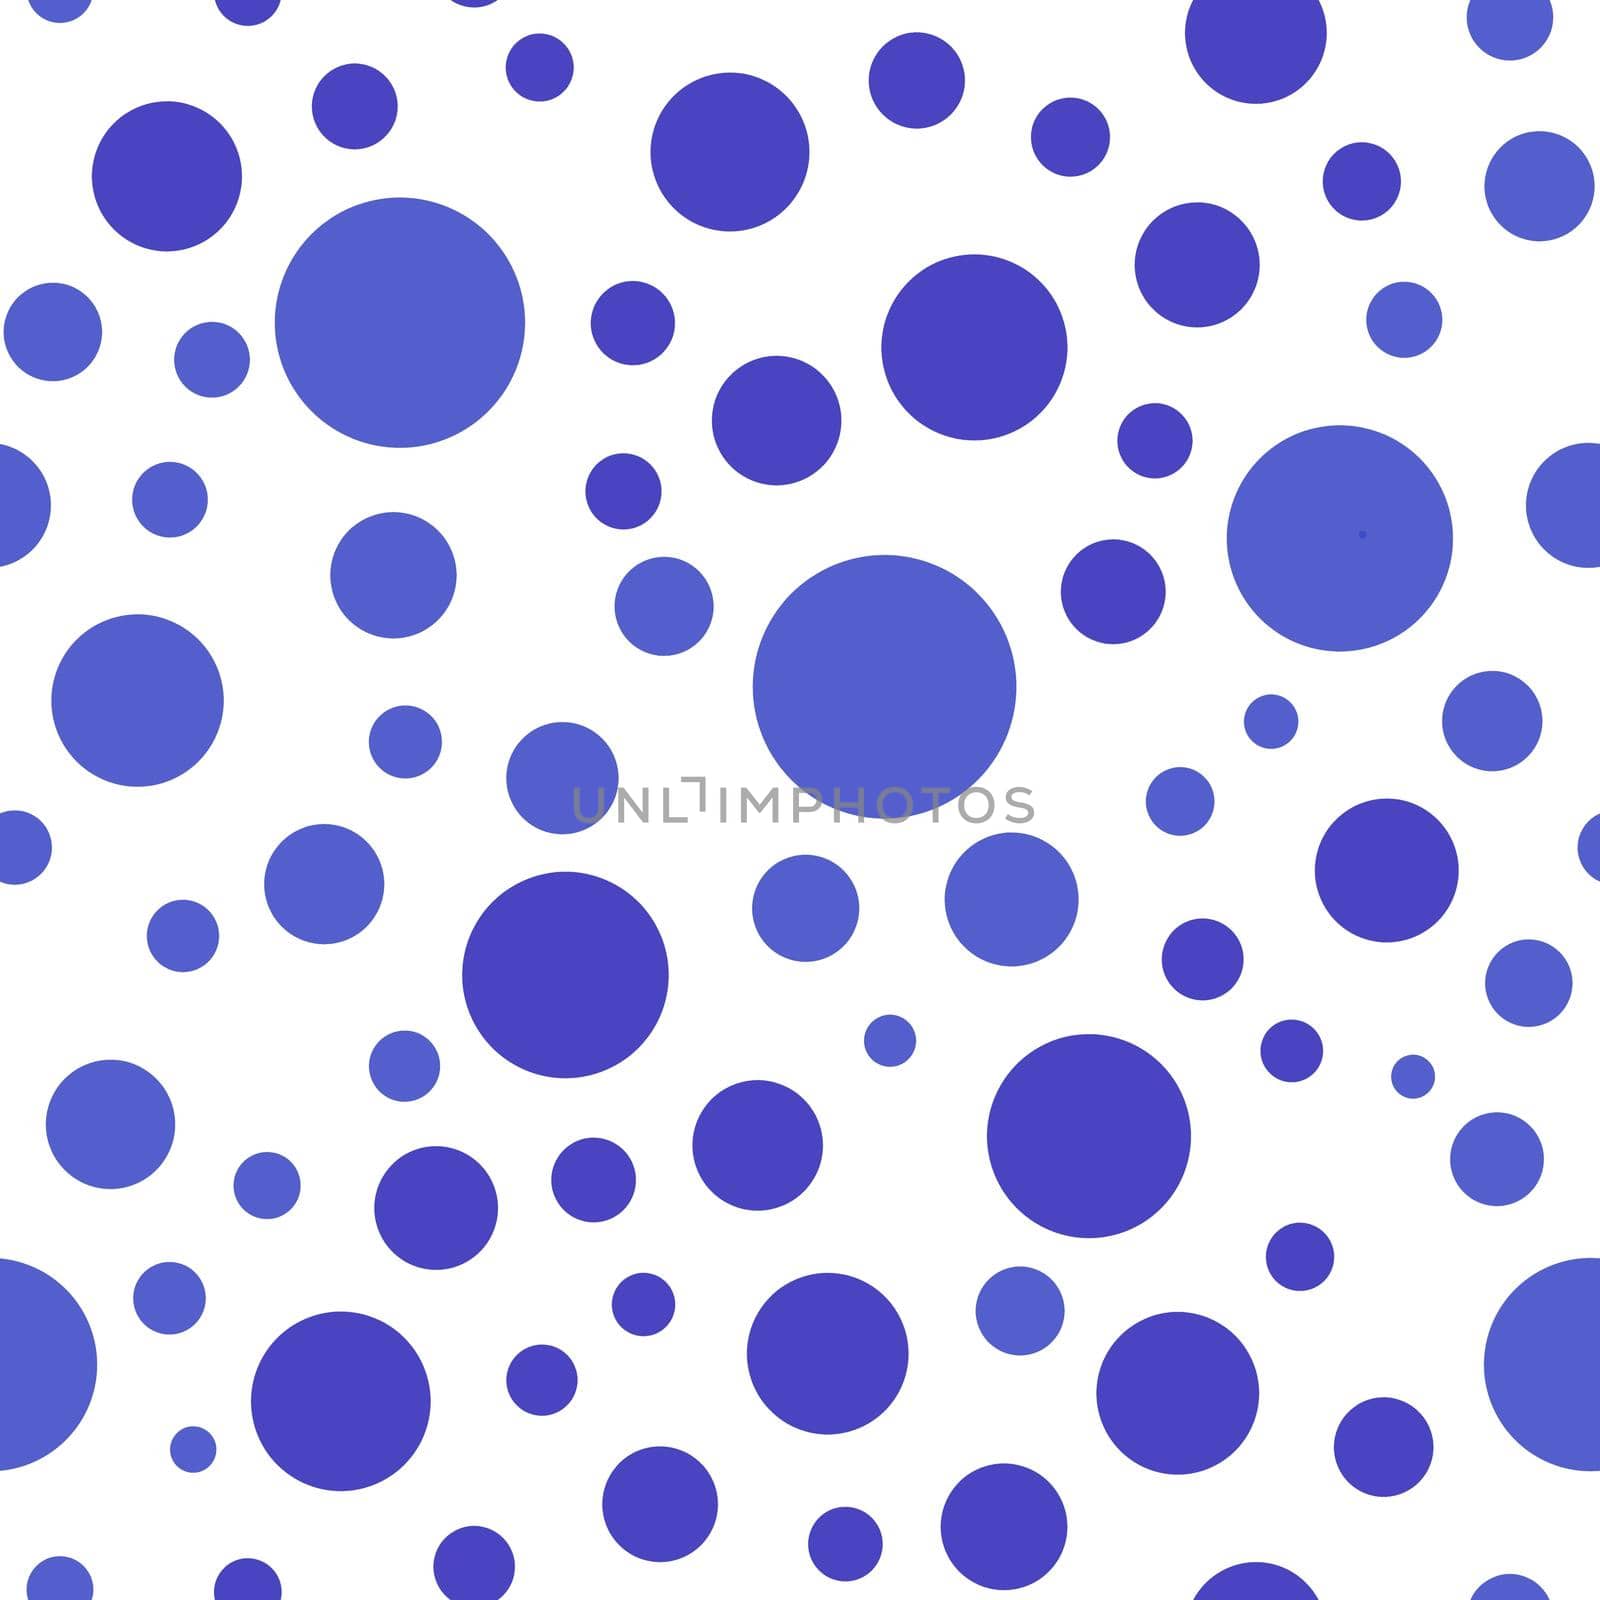 Abstract seamless pattern with colorful balls.Illustration of overlapping colorful dots pattern for background abstract.Polka dots ornament.Good for invitation,poster,card,flyer,banner,textile,fabric by Angelsmoon